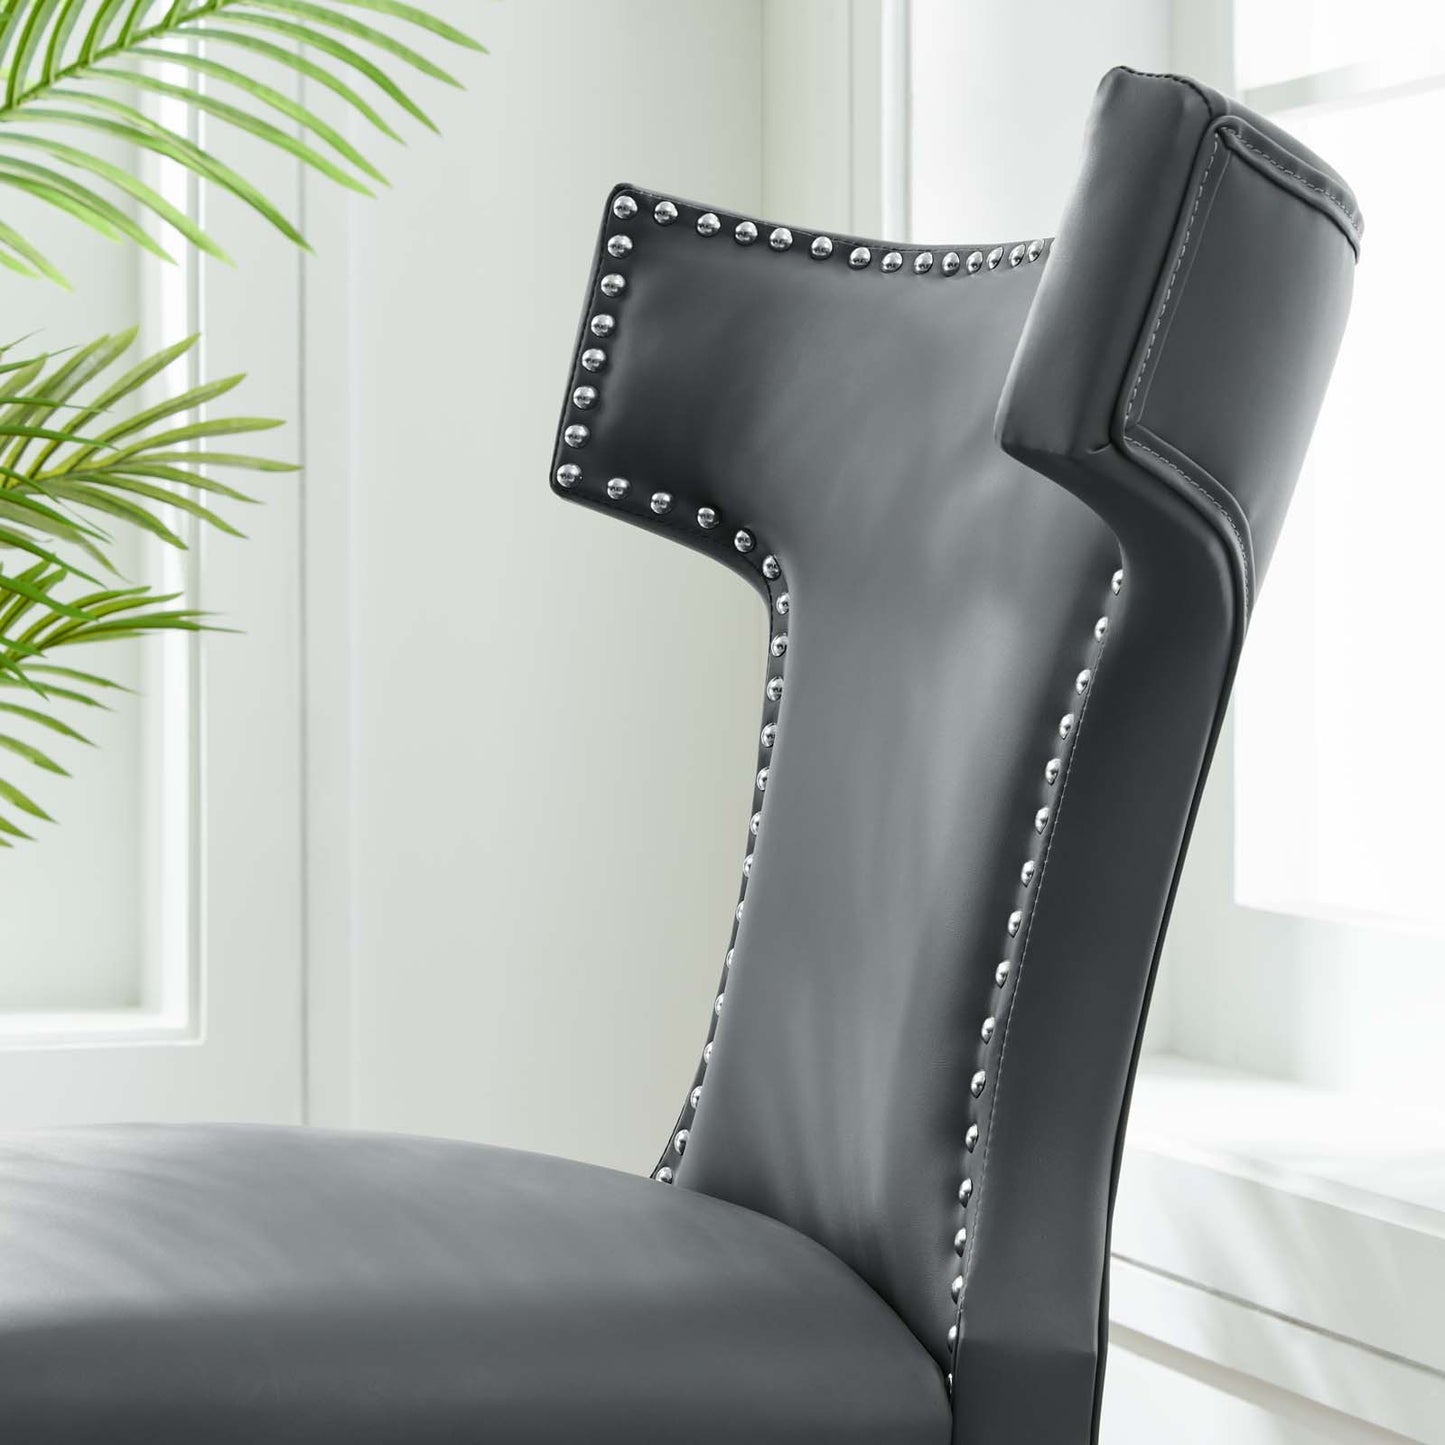 Curve Vegan Leather Dining Chair Gray EEI-2220-GRY